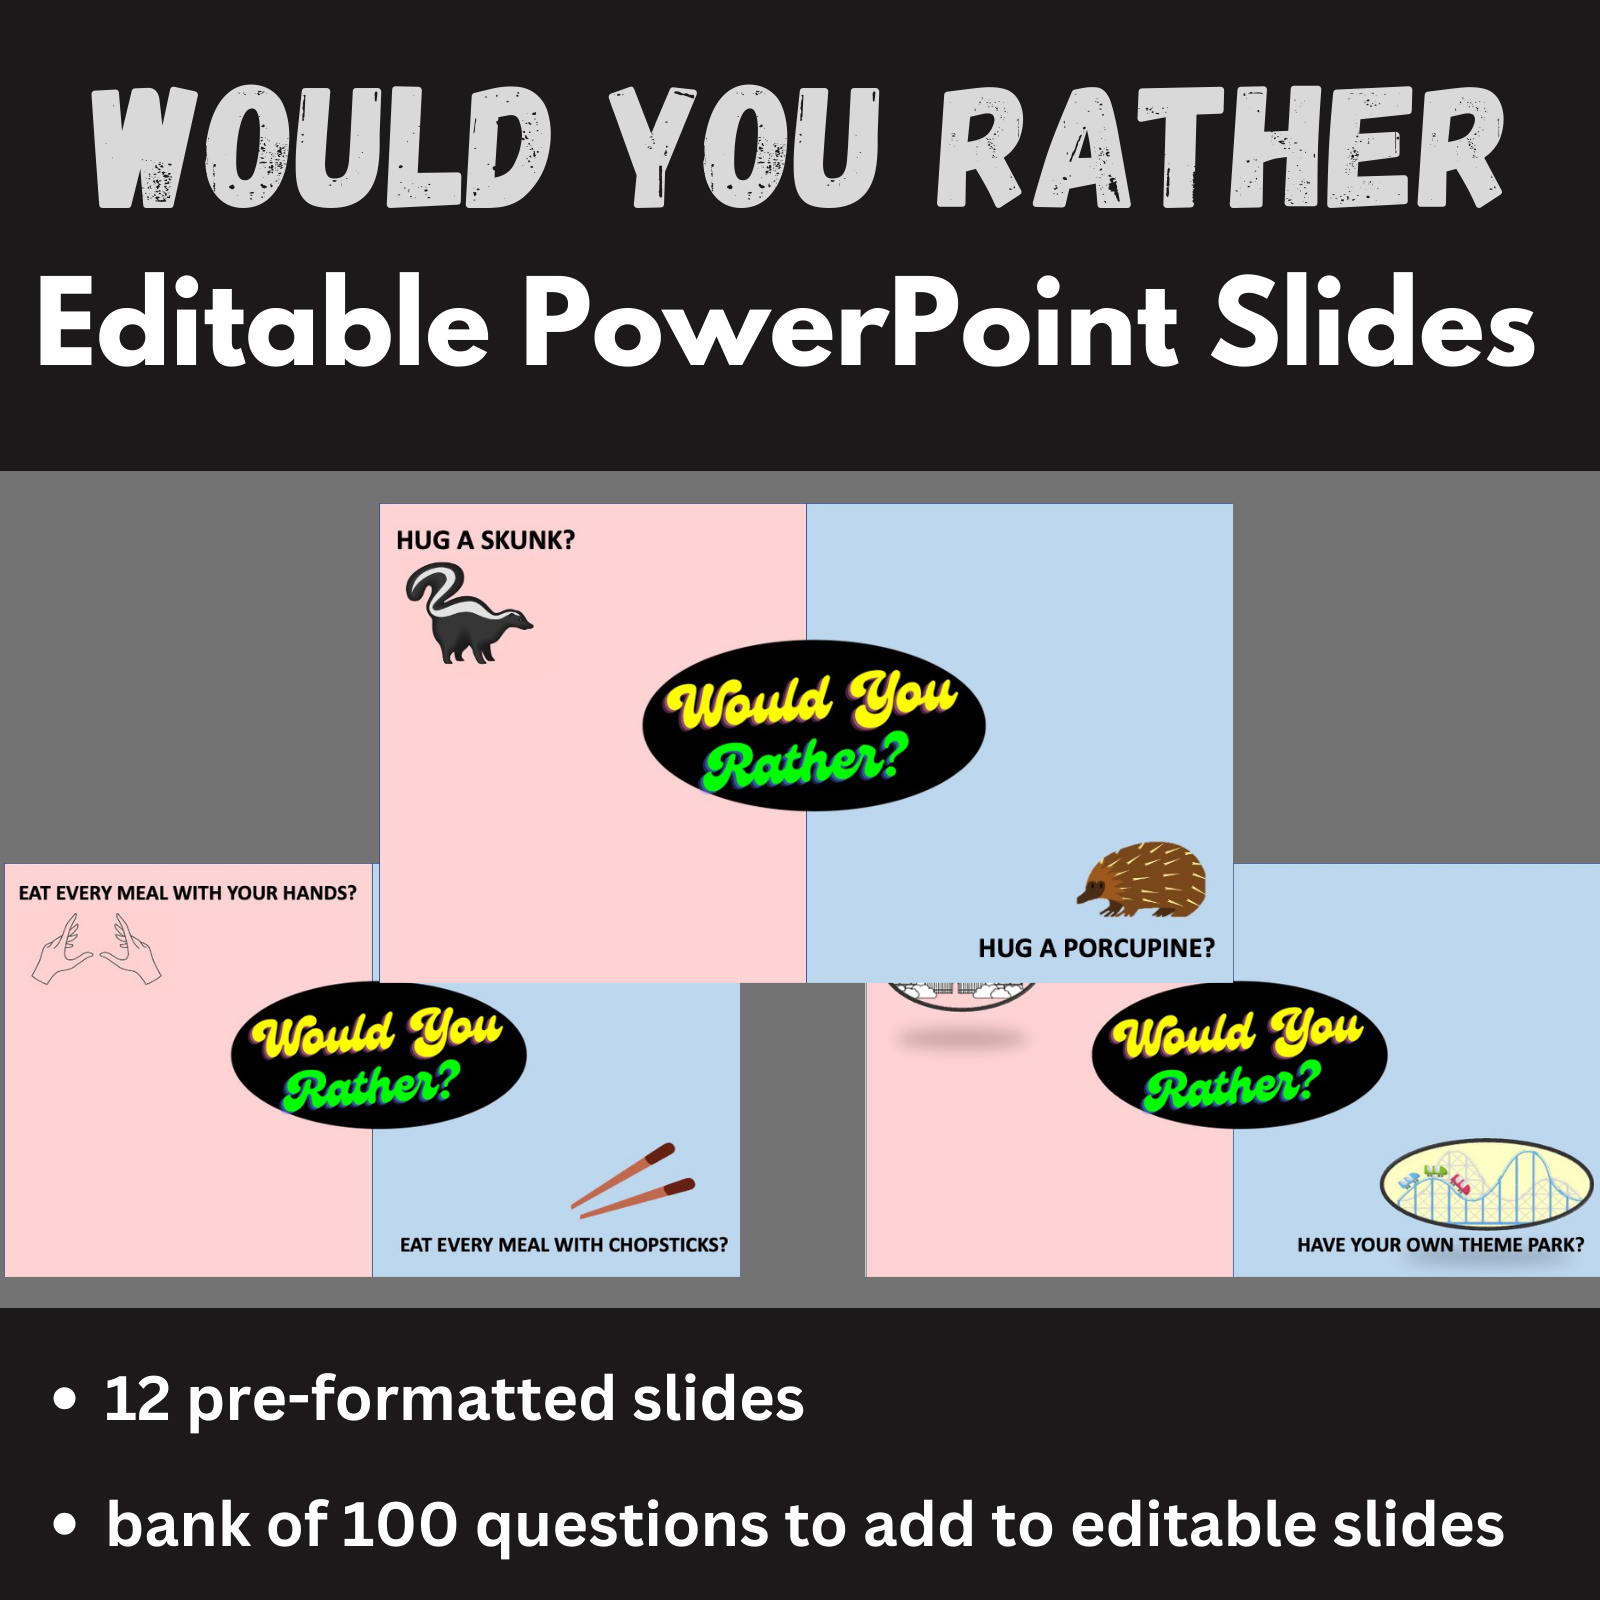 black background with white text that says "would you rather editable powerpoint slides.